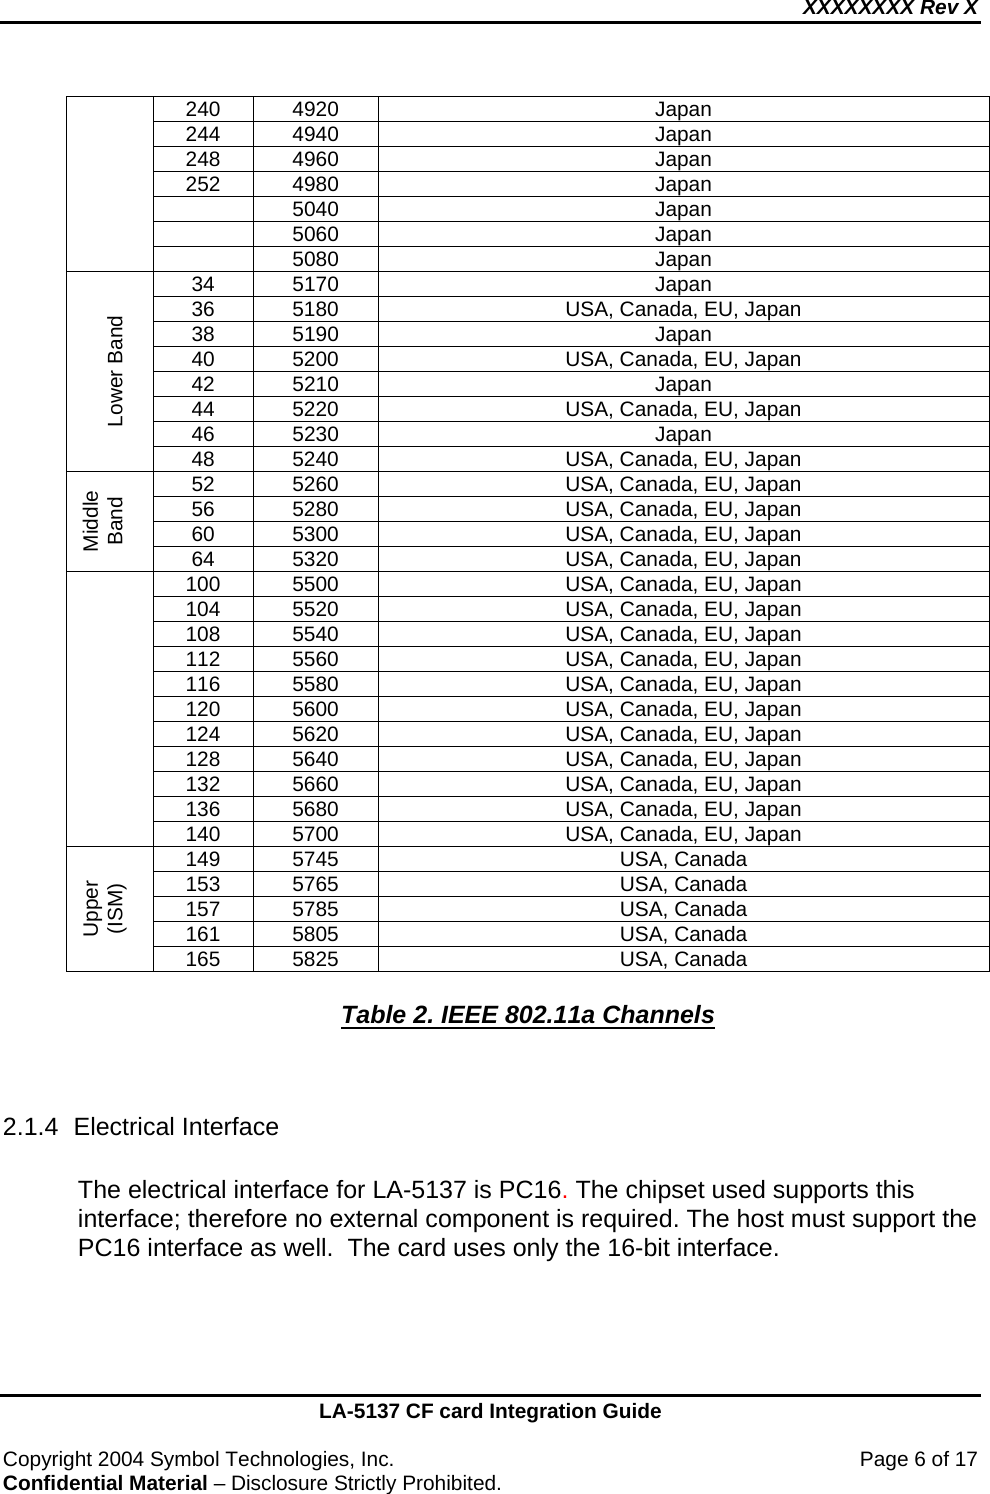 XXXXXXXX Rev X    LA-5137 CF card Integration Guide  Copyright 2004 Symbol Technologies, Inc.    Page 6 of 17 Confidential Material – Disclosure Strictly Prohibited. 240 4920  Japan 244 4940  Japan 248 4960  Japan 252 4980  Japan  5040  Japan  5060  Japan   5080  Japan 34 5170  Japan 36  5180  USA, Canada, EU, Japan 38 5190  Japan 40  5200  USA, Canada, EU, Japan 42 5210  Japan 44  5220  USA, Canada, EU, Japan 46 5230  Japan  Lower Band  48  5240  USA, Canada, EU, Japan 52  5260  USA, Canada, EU, Japan 56  5280  USA, Canada, EU, Japan 60  5300  USA, Canada, EU, Japan Middle Band  64  5320  USA, Canada, EU, Japan 100  5500  USA, Canada, EU, Japan 104  5520  USA, Canada, EU, Japan 108  5540  USA, Canada, EU, Japan 112  5560  USA, Canada, EU, Japan 116  5580  USA, Canada, EU, Japan 120  5600  USA, Canada, EU, Japan 124  5620  USA, Canada, EU, Japan 128  5640  USA, Canada, EU, Japan 132  5660  USA, Canada, EU, Japan 136  5680  USA, Canada, EU, Japan  140  5700  USA, Canada, EU, Japan 149 5745  USA, Canada 153 5765  USA, Canada 157 5785  USA, Canada 161 5805  USA, Canada Upper  (ISM)  165 5825  USA, Canada  Table 2. IEEE 802.11a Channels   2.1.4 Electrical Interface  The electrical interface for LA-5137 is PC16. The chipset used supports this interface; therefore no external component is required. The host must support the PC16 interface as well.  The card uses only the 16-bit interface.     